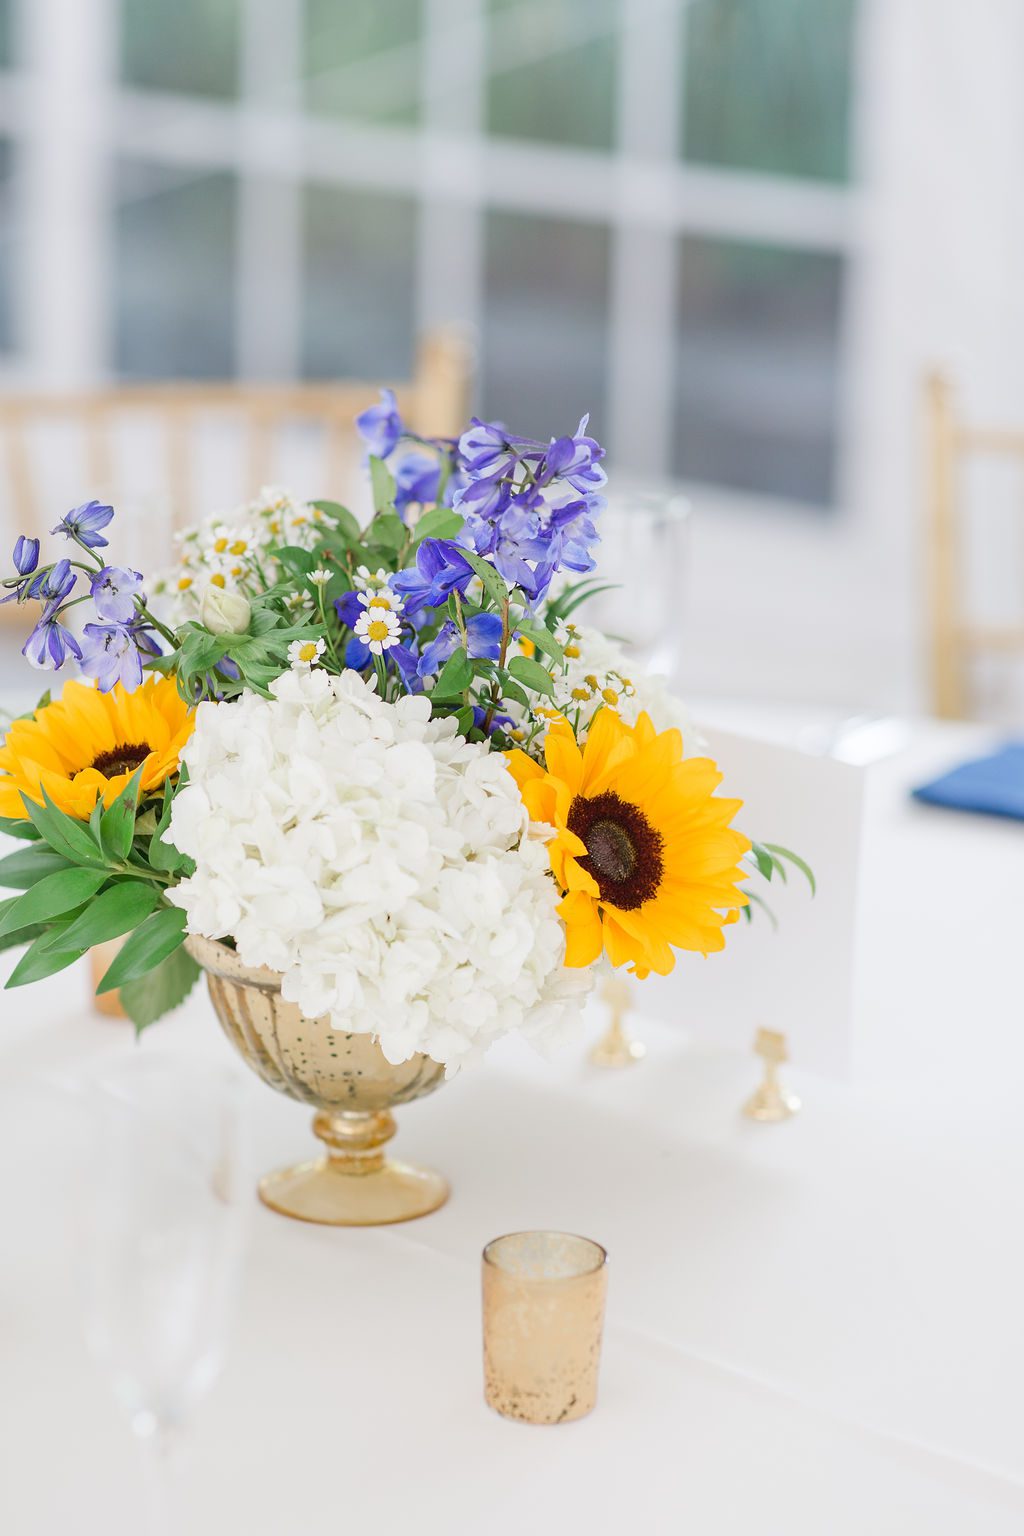 Centerpieces in an elegant gold compote with Sunflower and Delphinium for the blue in this couple’s palette. Photography by Emily Alyssa Photography.